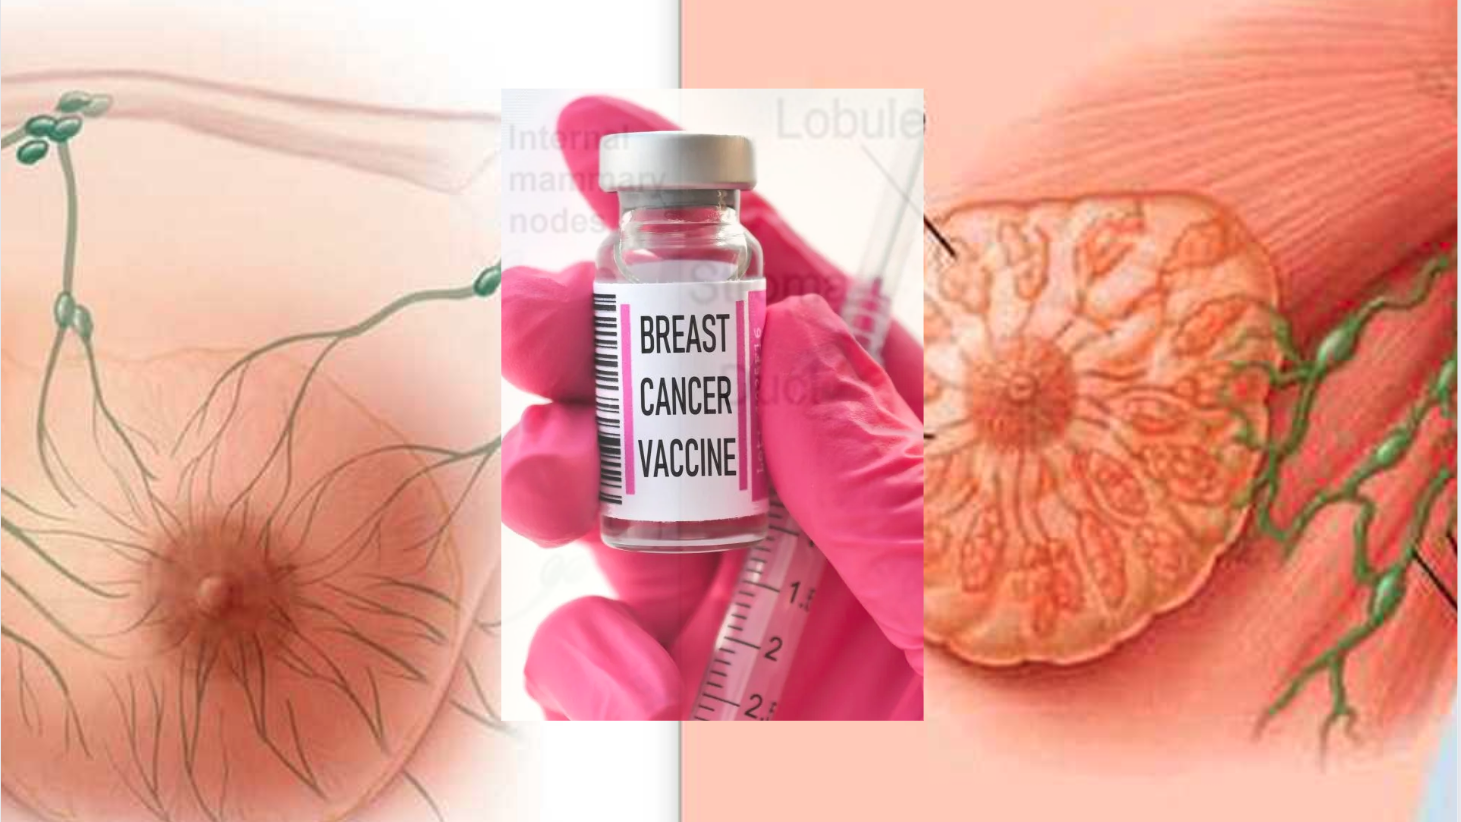 Breast Cancer Vaccine Hope for Women's Health